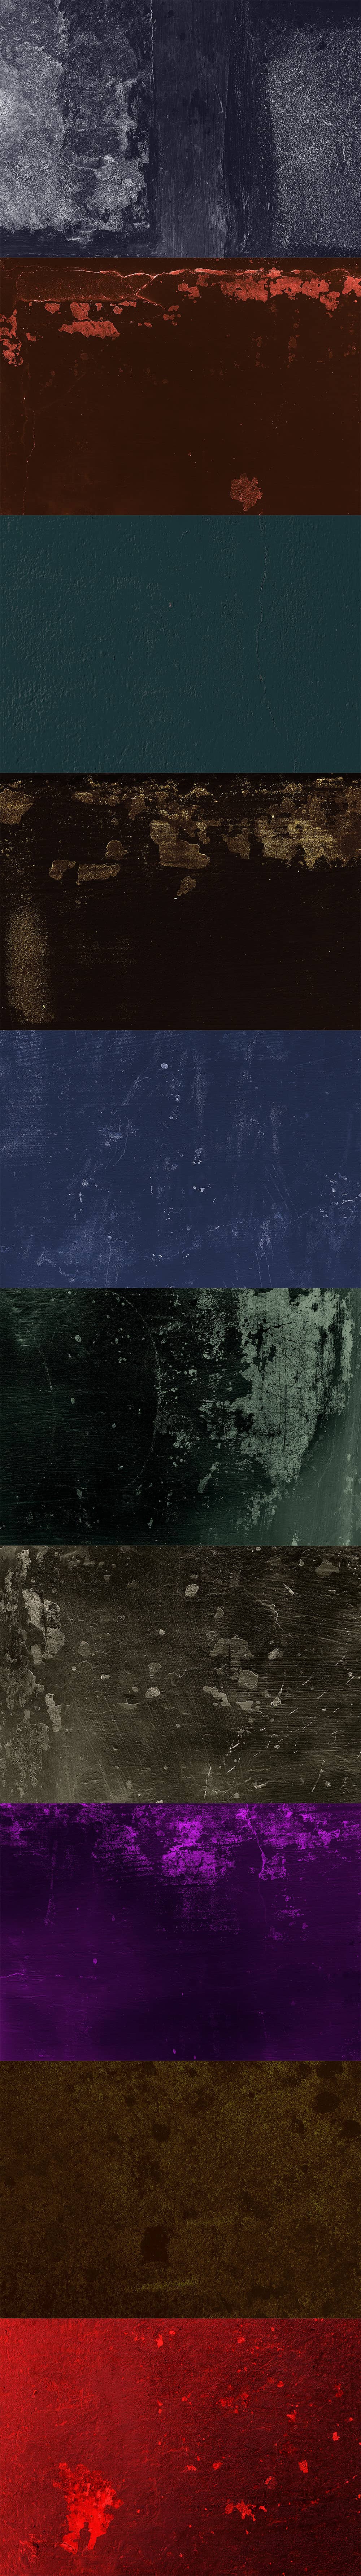 Free-Dramatic-Color-Grunge-Textures